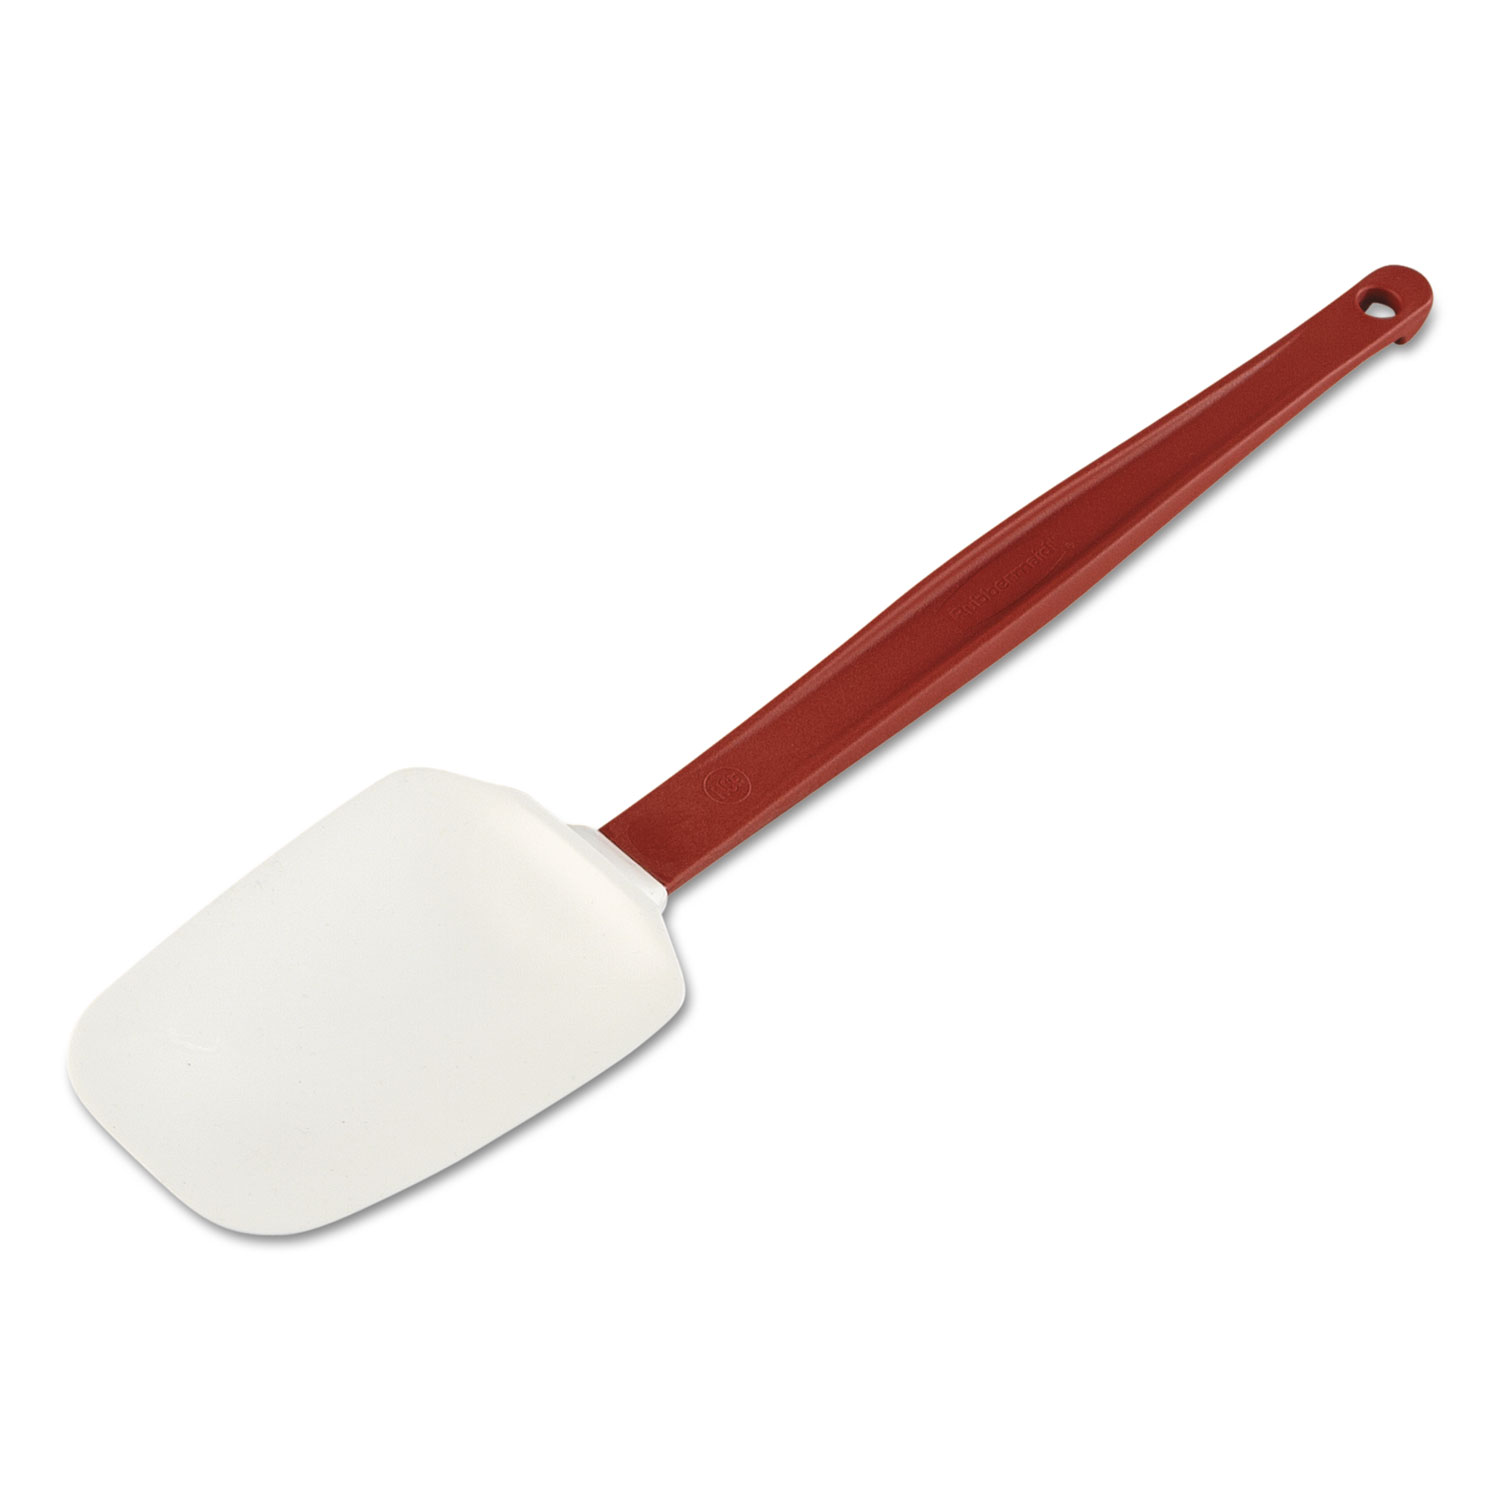  Rubbermaid Commercial FG196700RED High Heat Scraper Spoon, White w/Red Blade, 13 1/2 (RCP1967RED) 